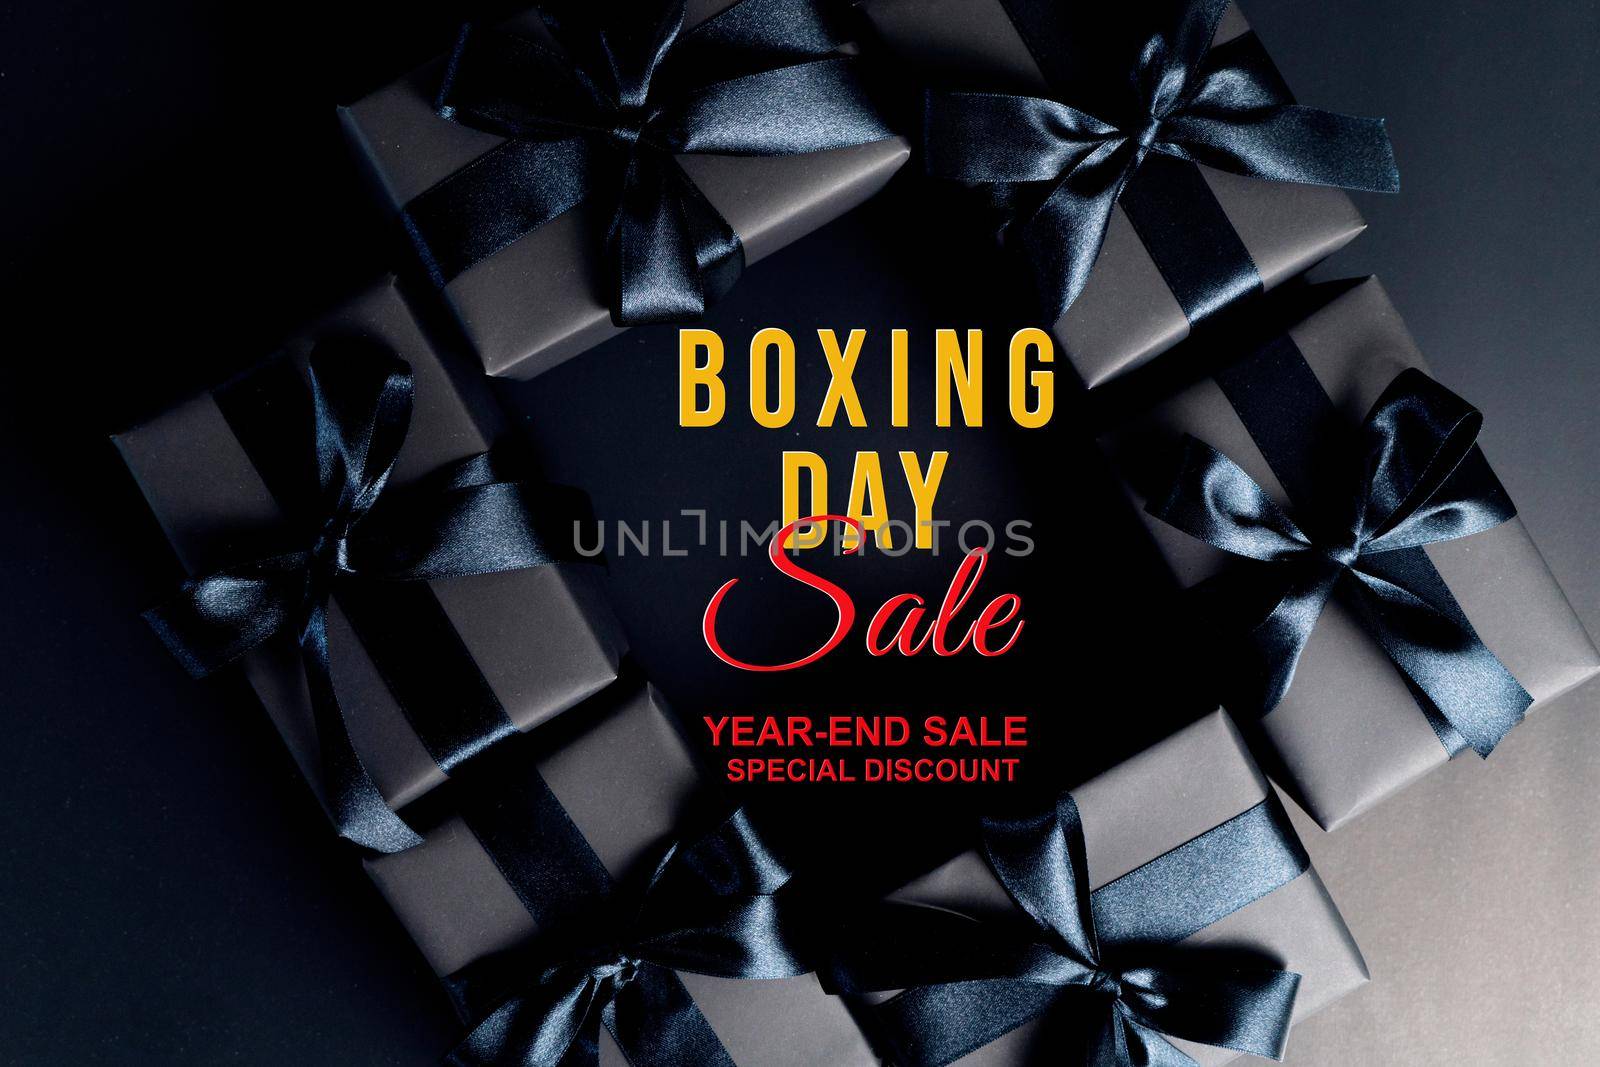 Boxing Day sale, black gift box for online shopping